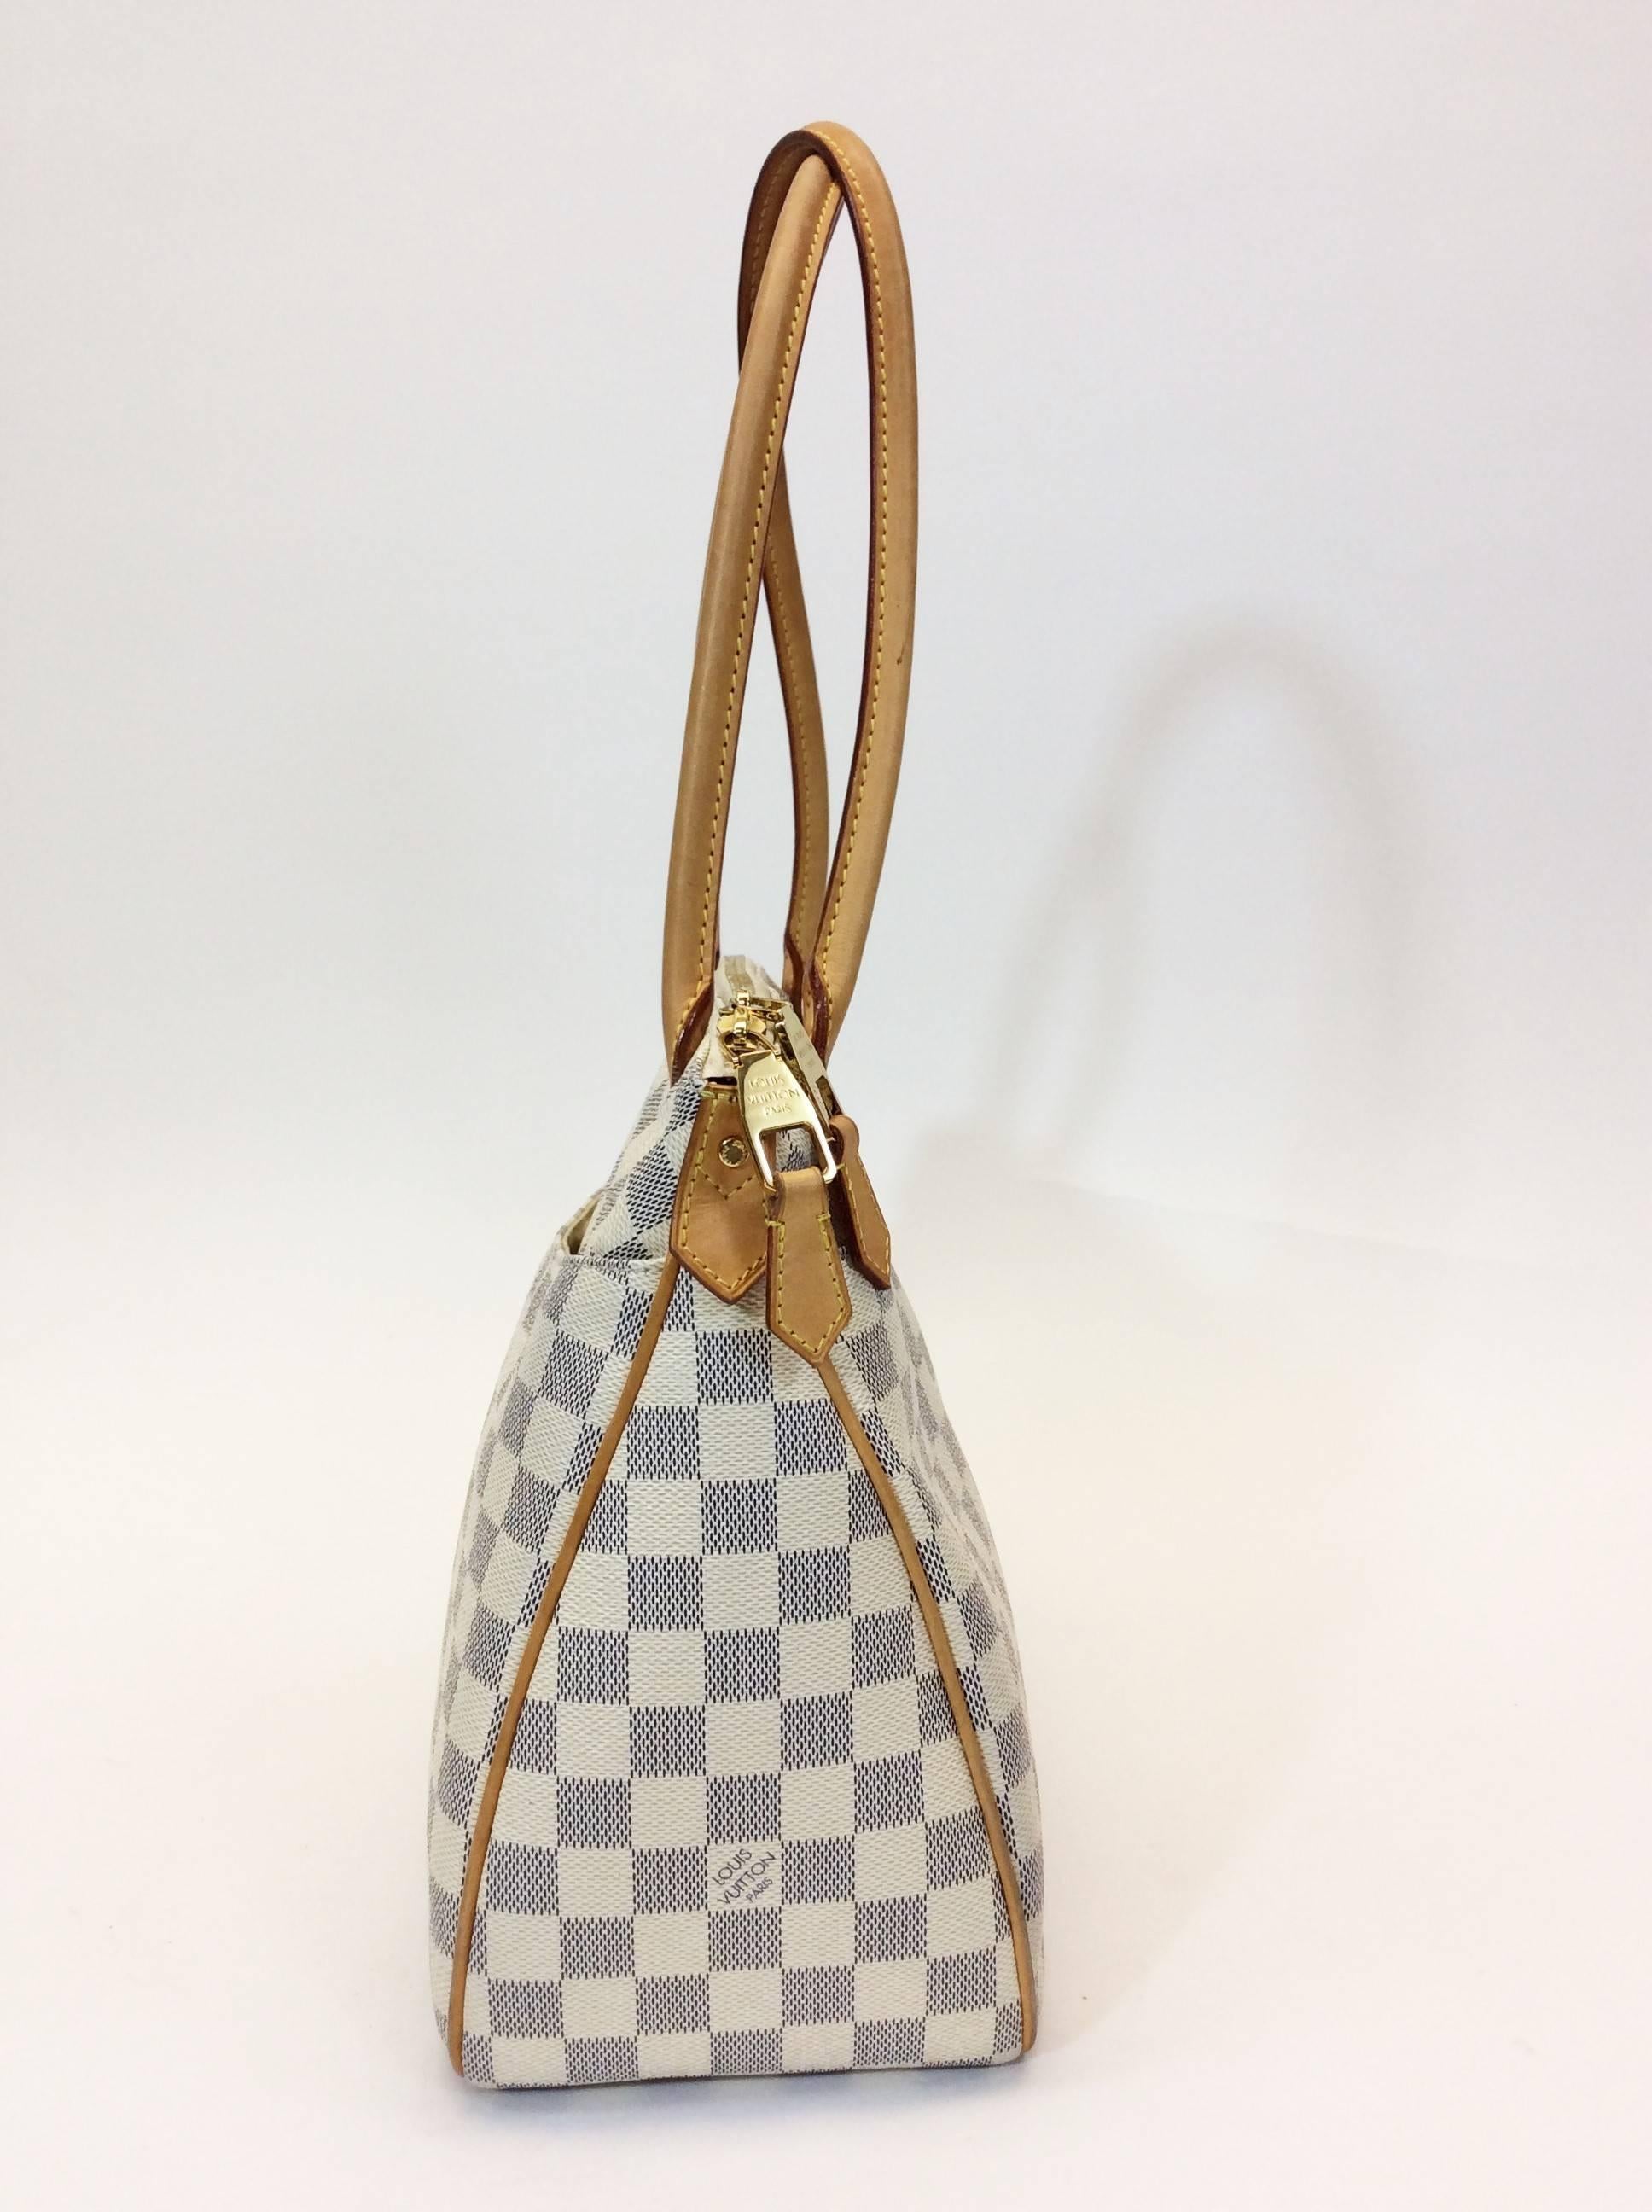 Louis Vuitton Damier Azur patterned Handbag
Cameltone Leather Shoulder Straps and Lining
Goldtone Zipper on Top for Closure
One Purse Width Pocket on Both sides
Two Smaller Pockets on Inside
Tan Canvas Interior
9.5